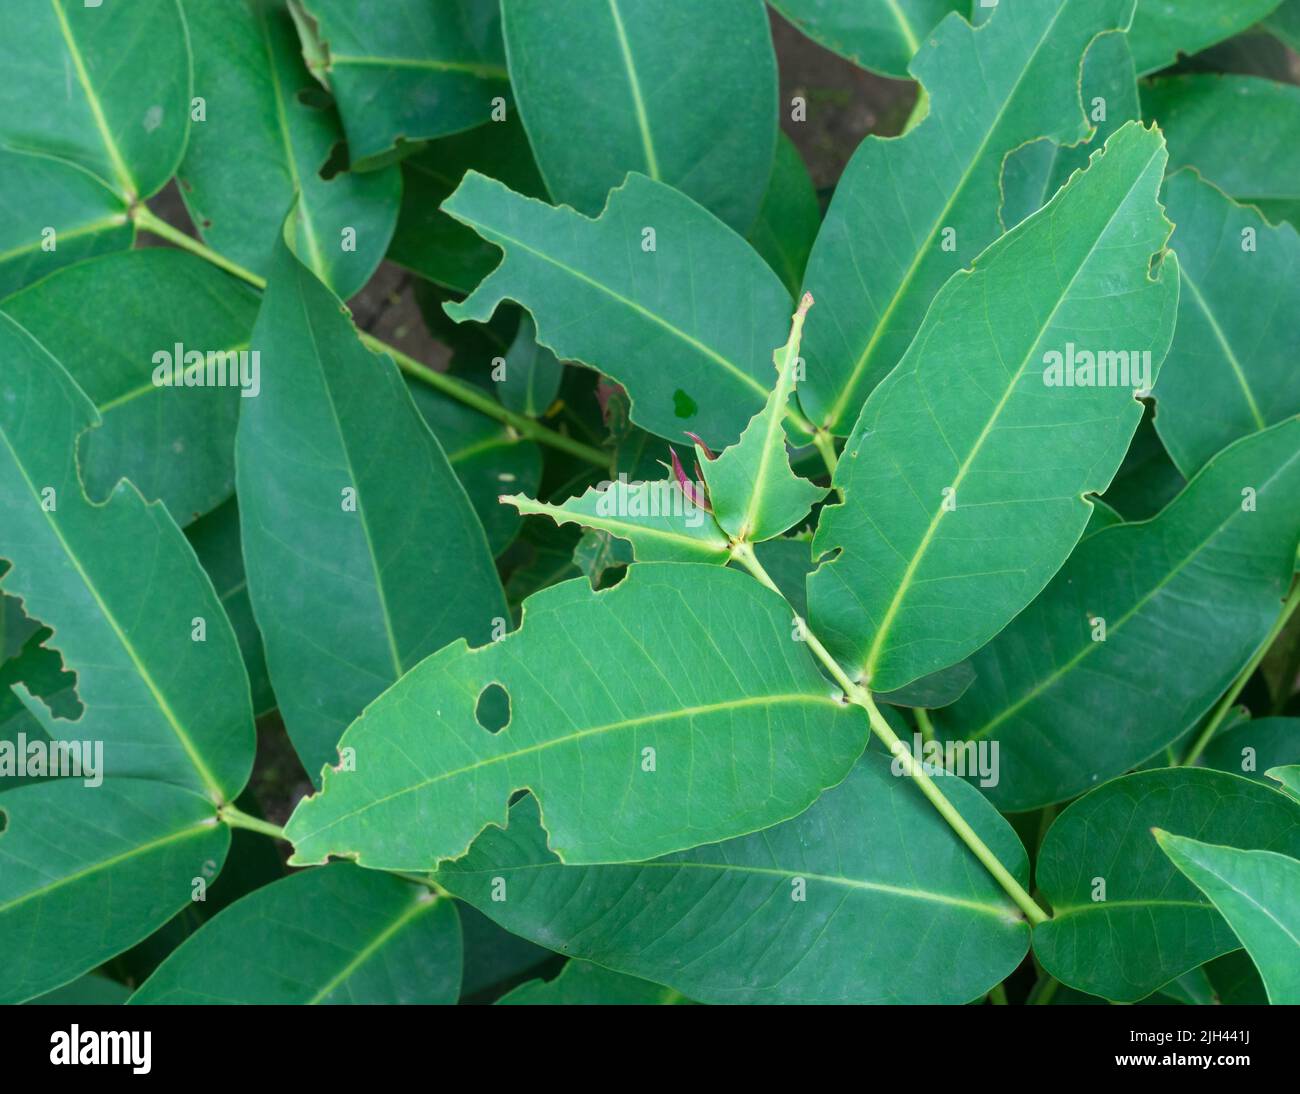 green plant leaves with holes, eaten or damaged by insects or pests Stock Photo